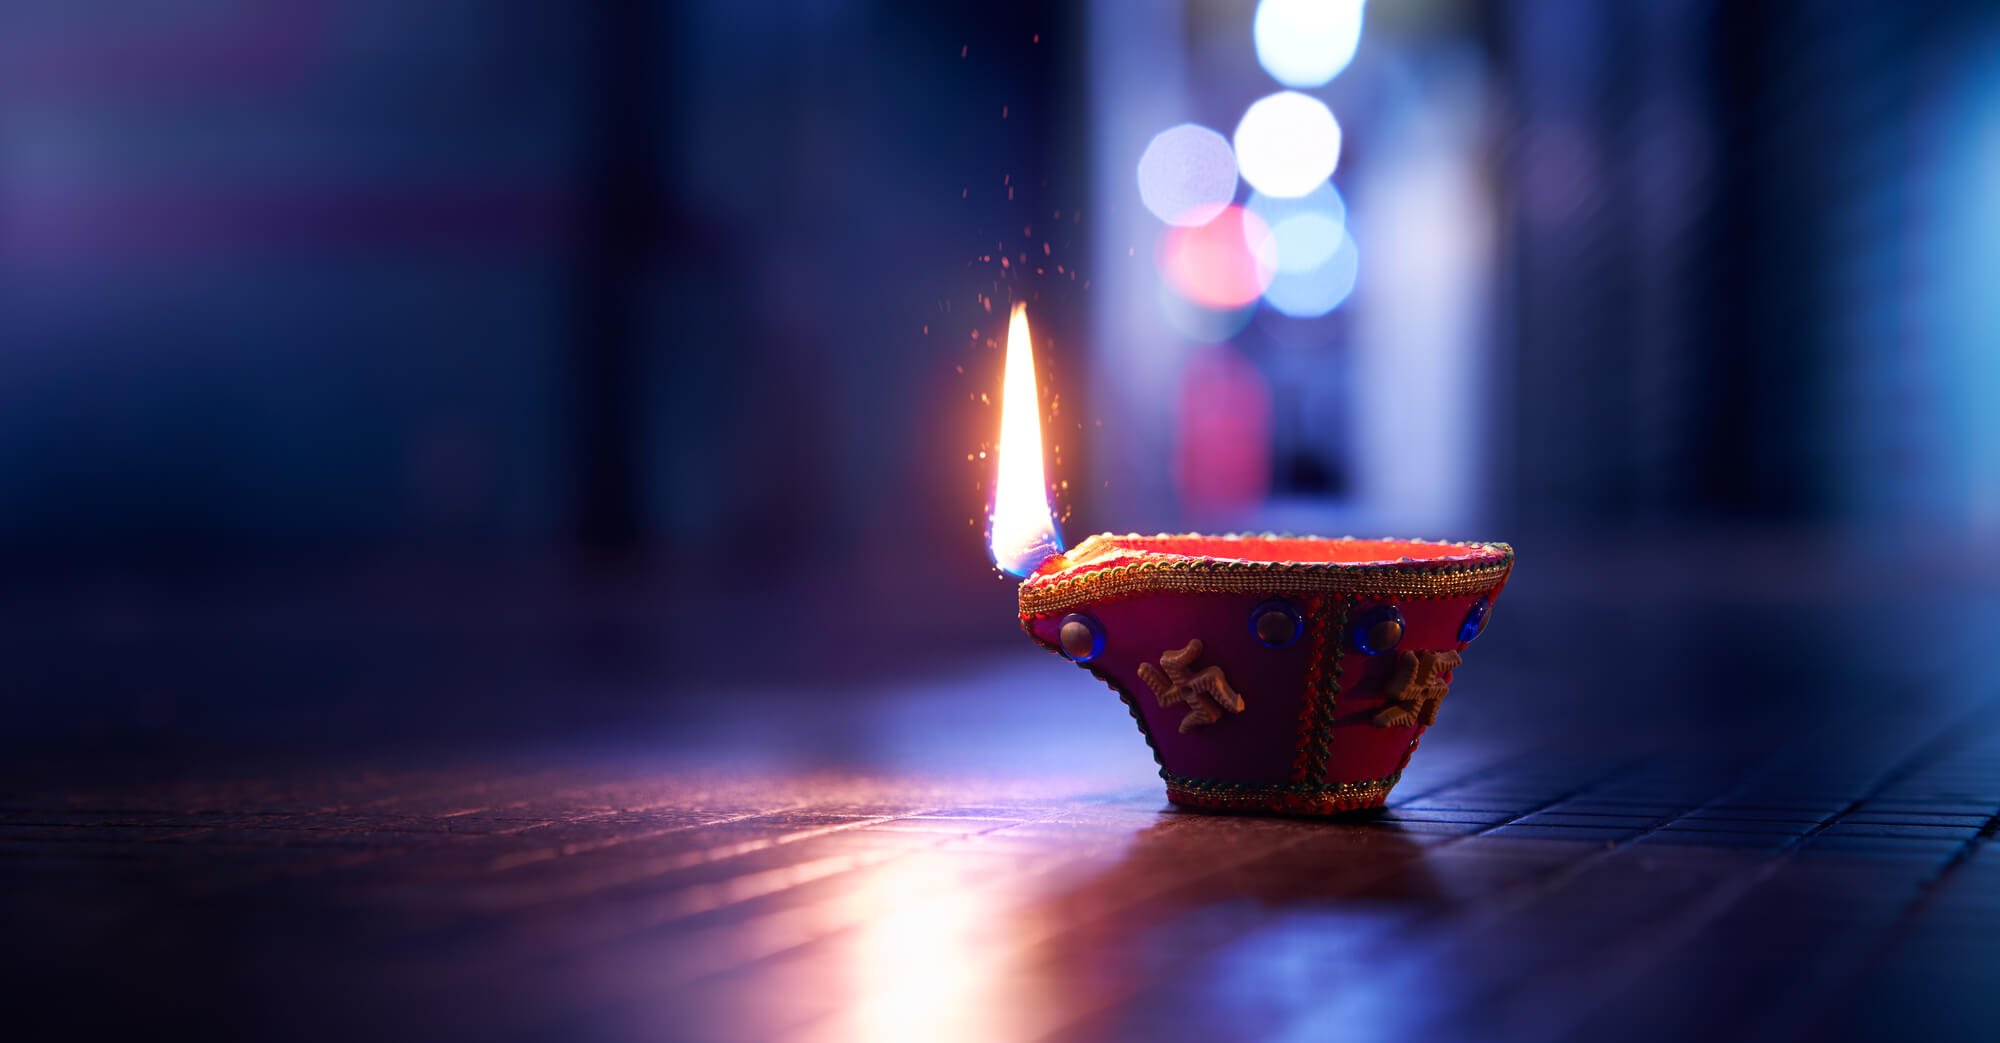 Vacation homes for Diwali image of Diwali candle on a table